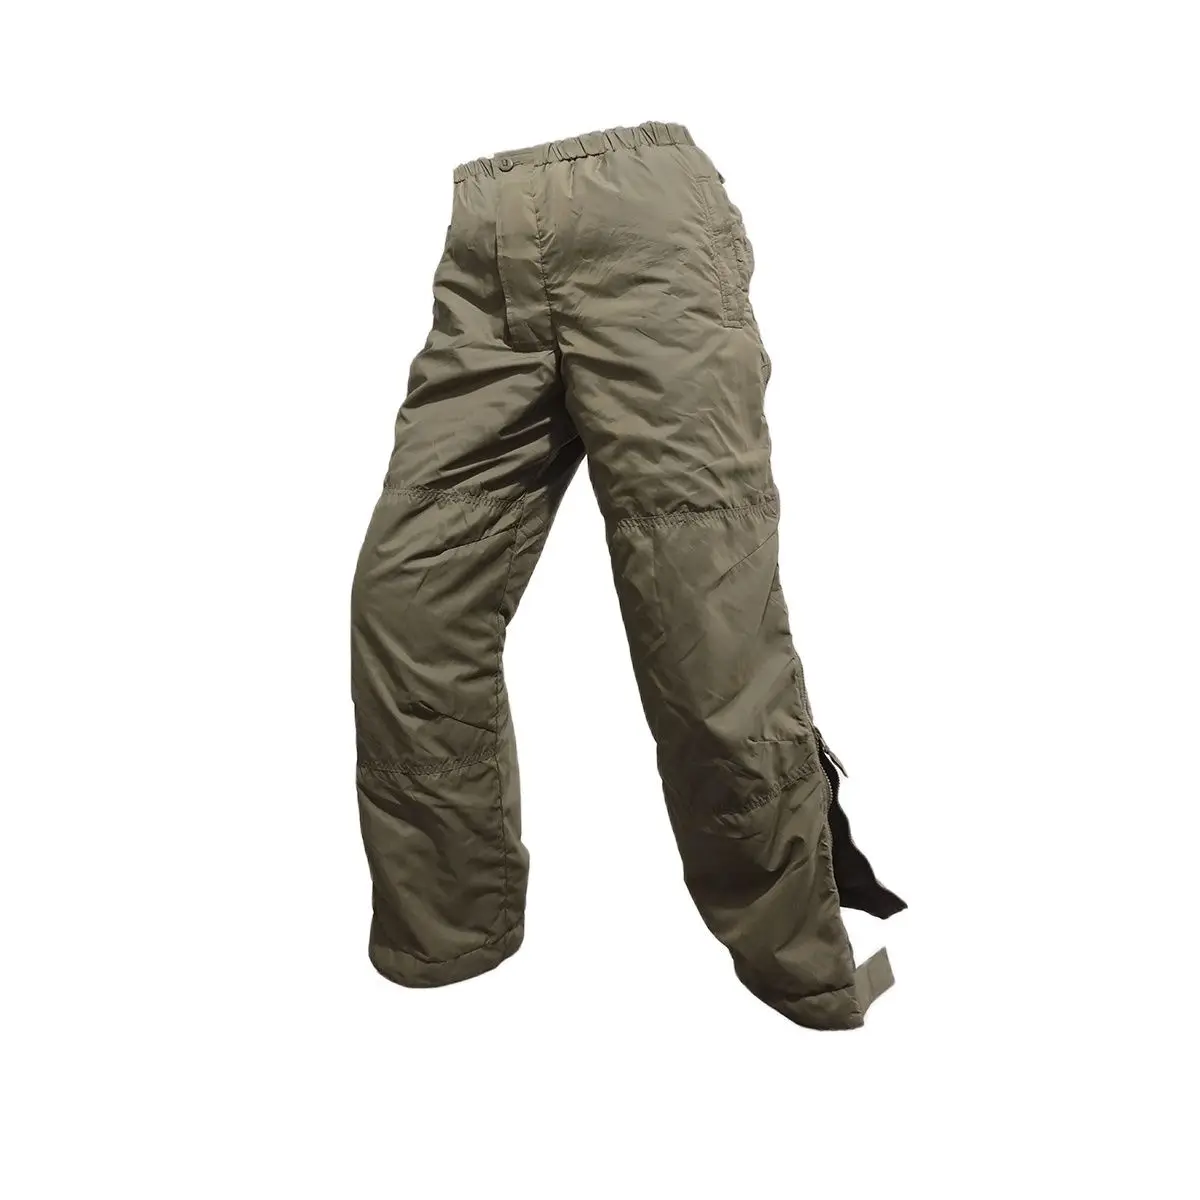 

UK Military Army Pants,Military Surplus Government Issue Outdoor Light Pants Winter Thermal Waterproof windproof Pants